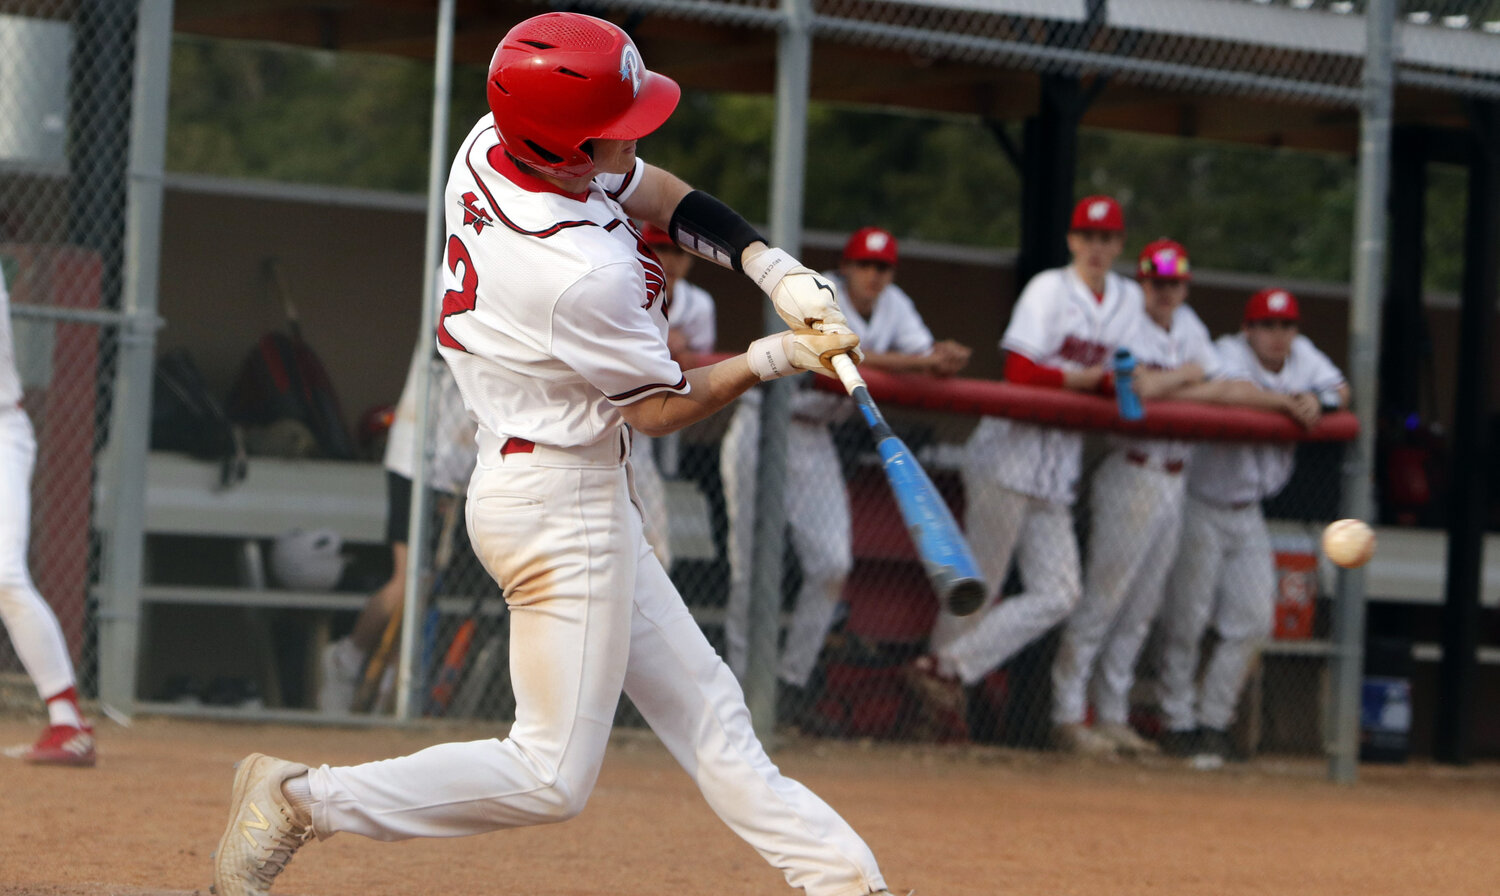 Caleb Clark swings at a pitch during the seventh inning of Warrenton's loss to St. Charles West.